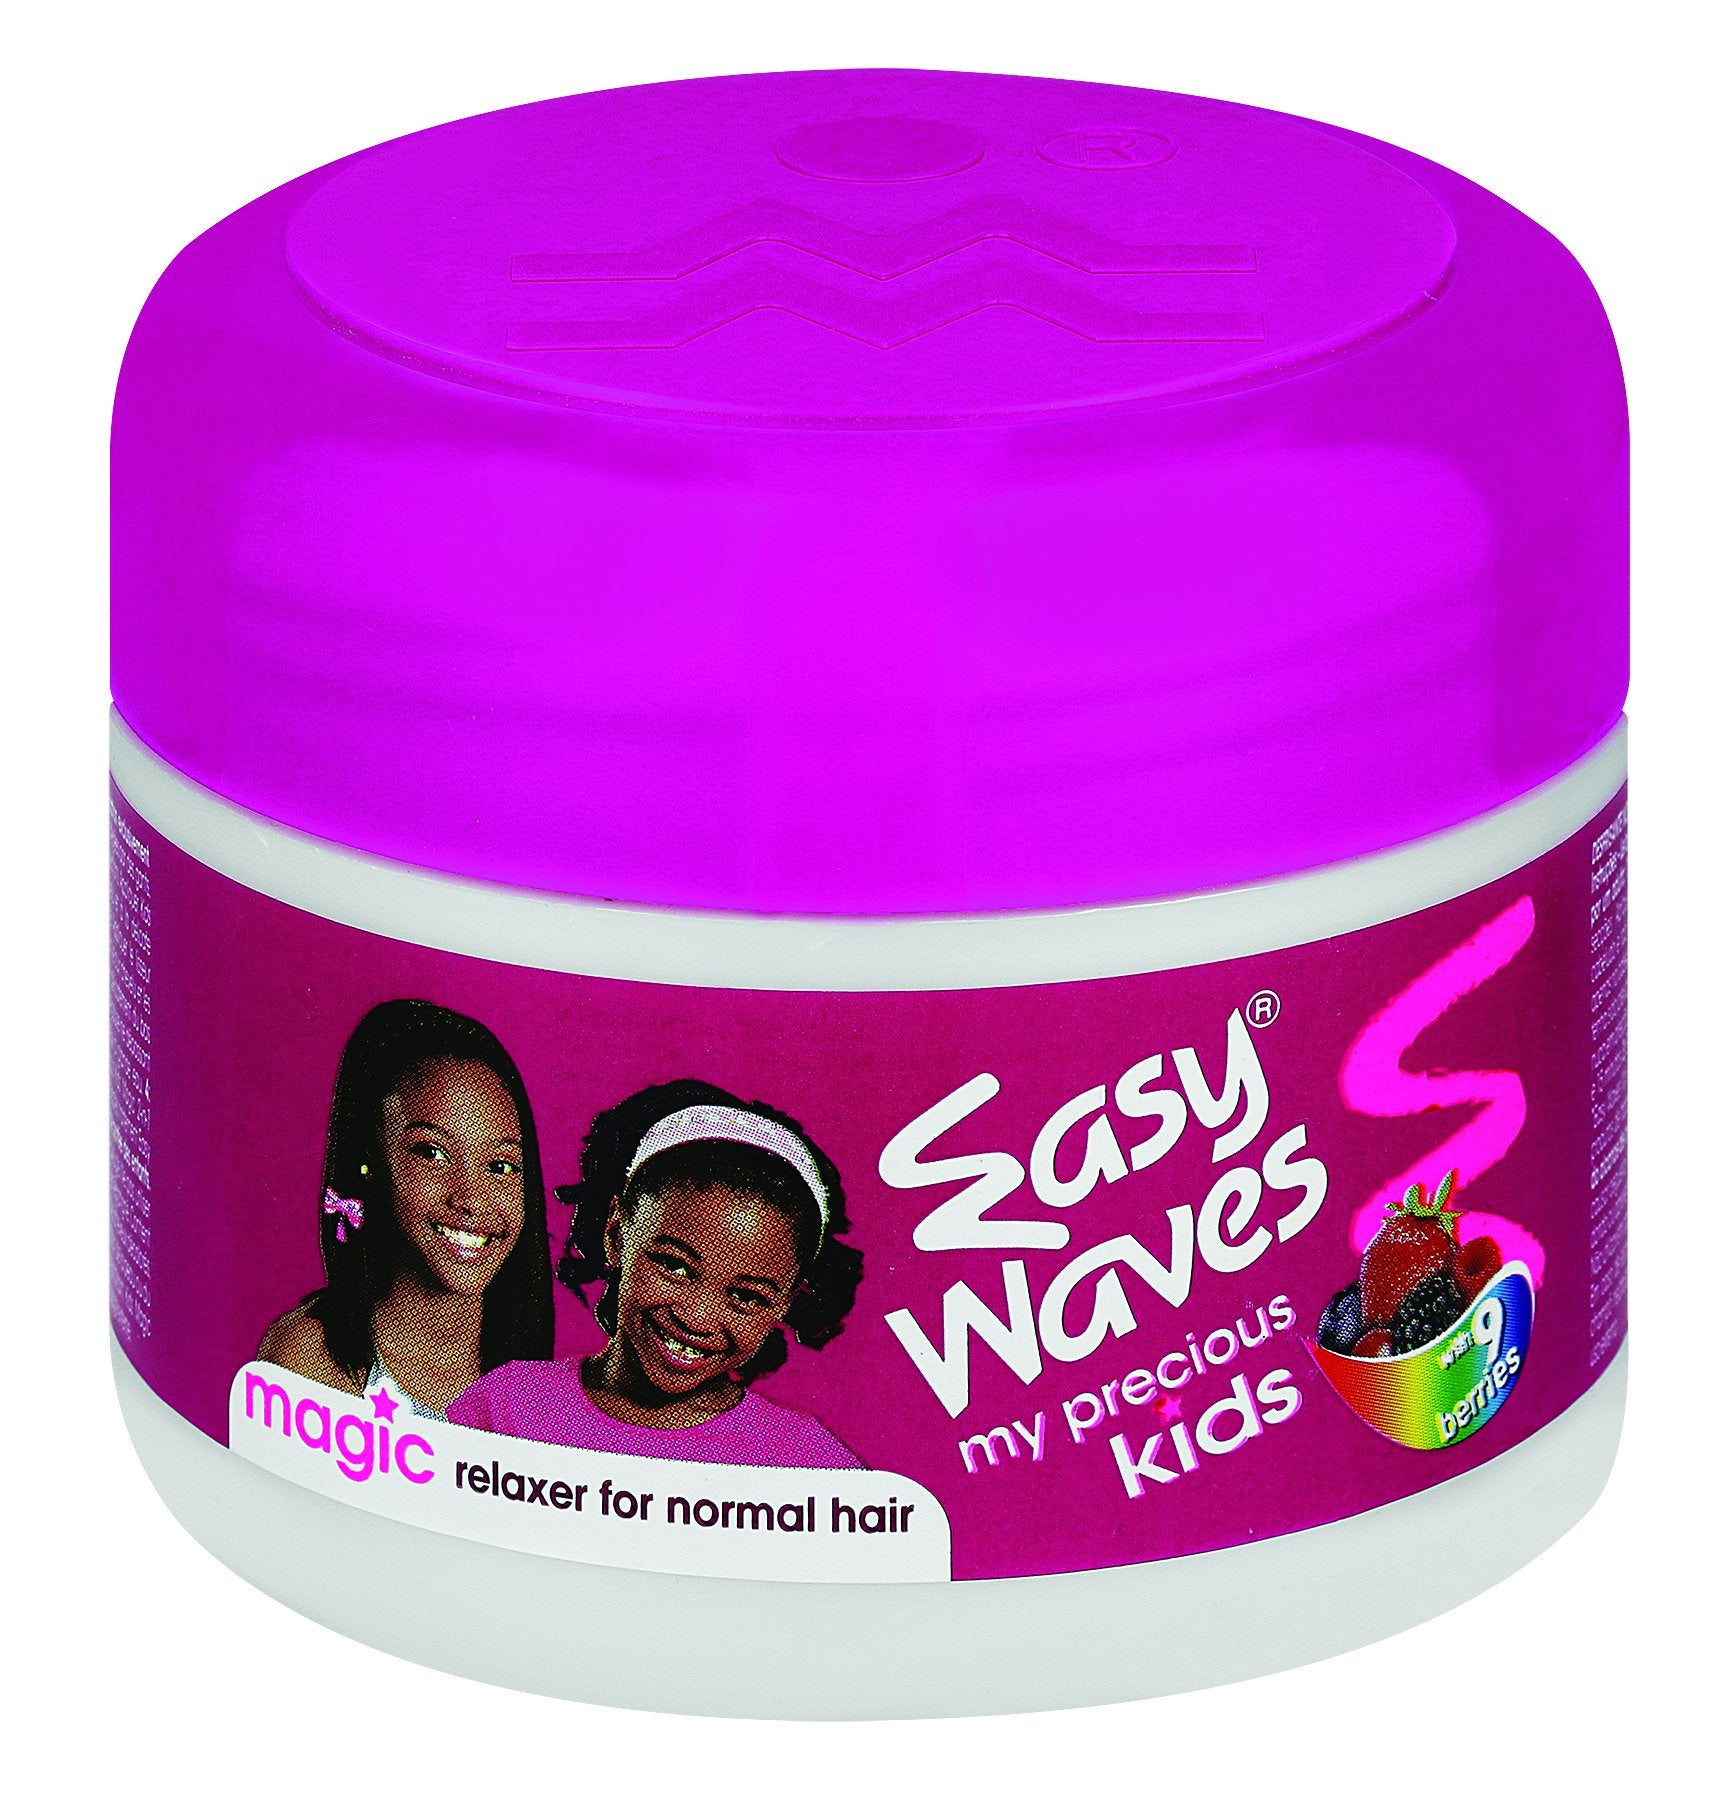 Easy Waves my precious kids magic normal relaxer 250ml  12-Pack